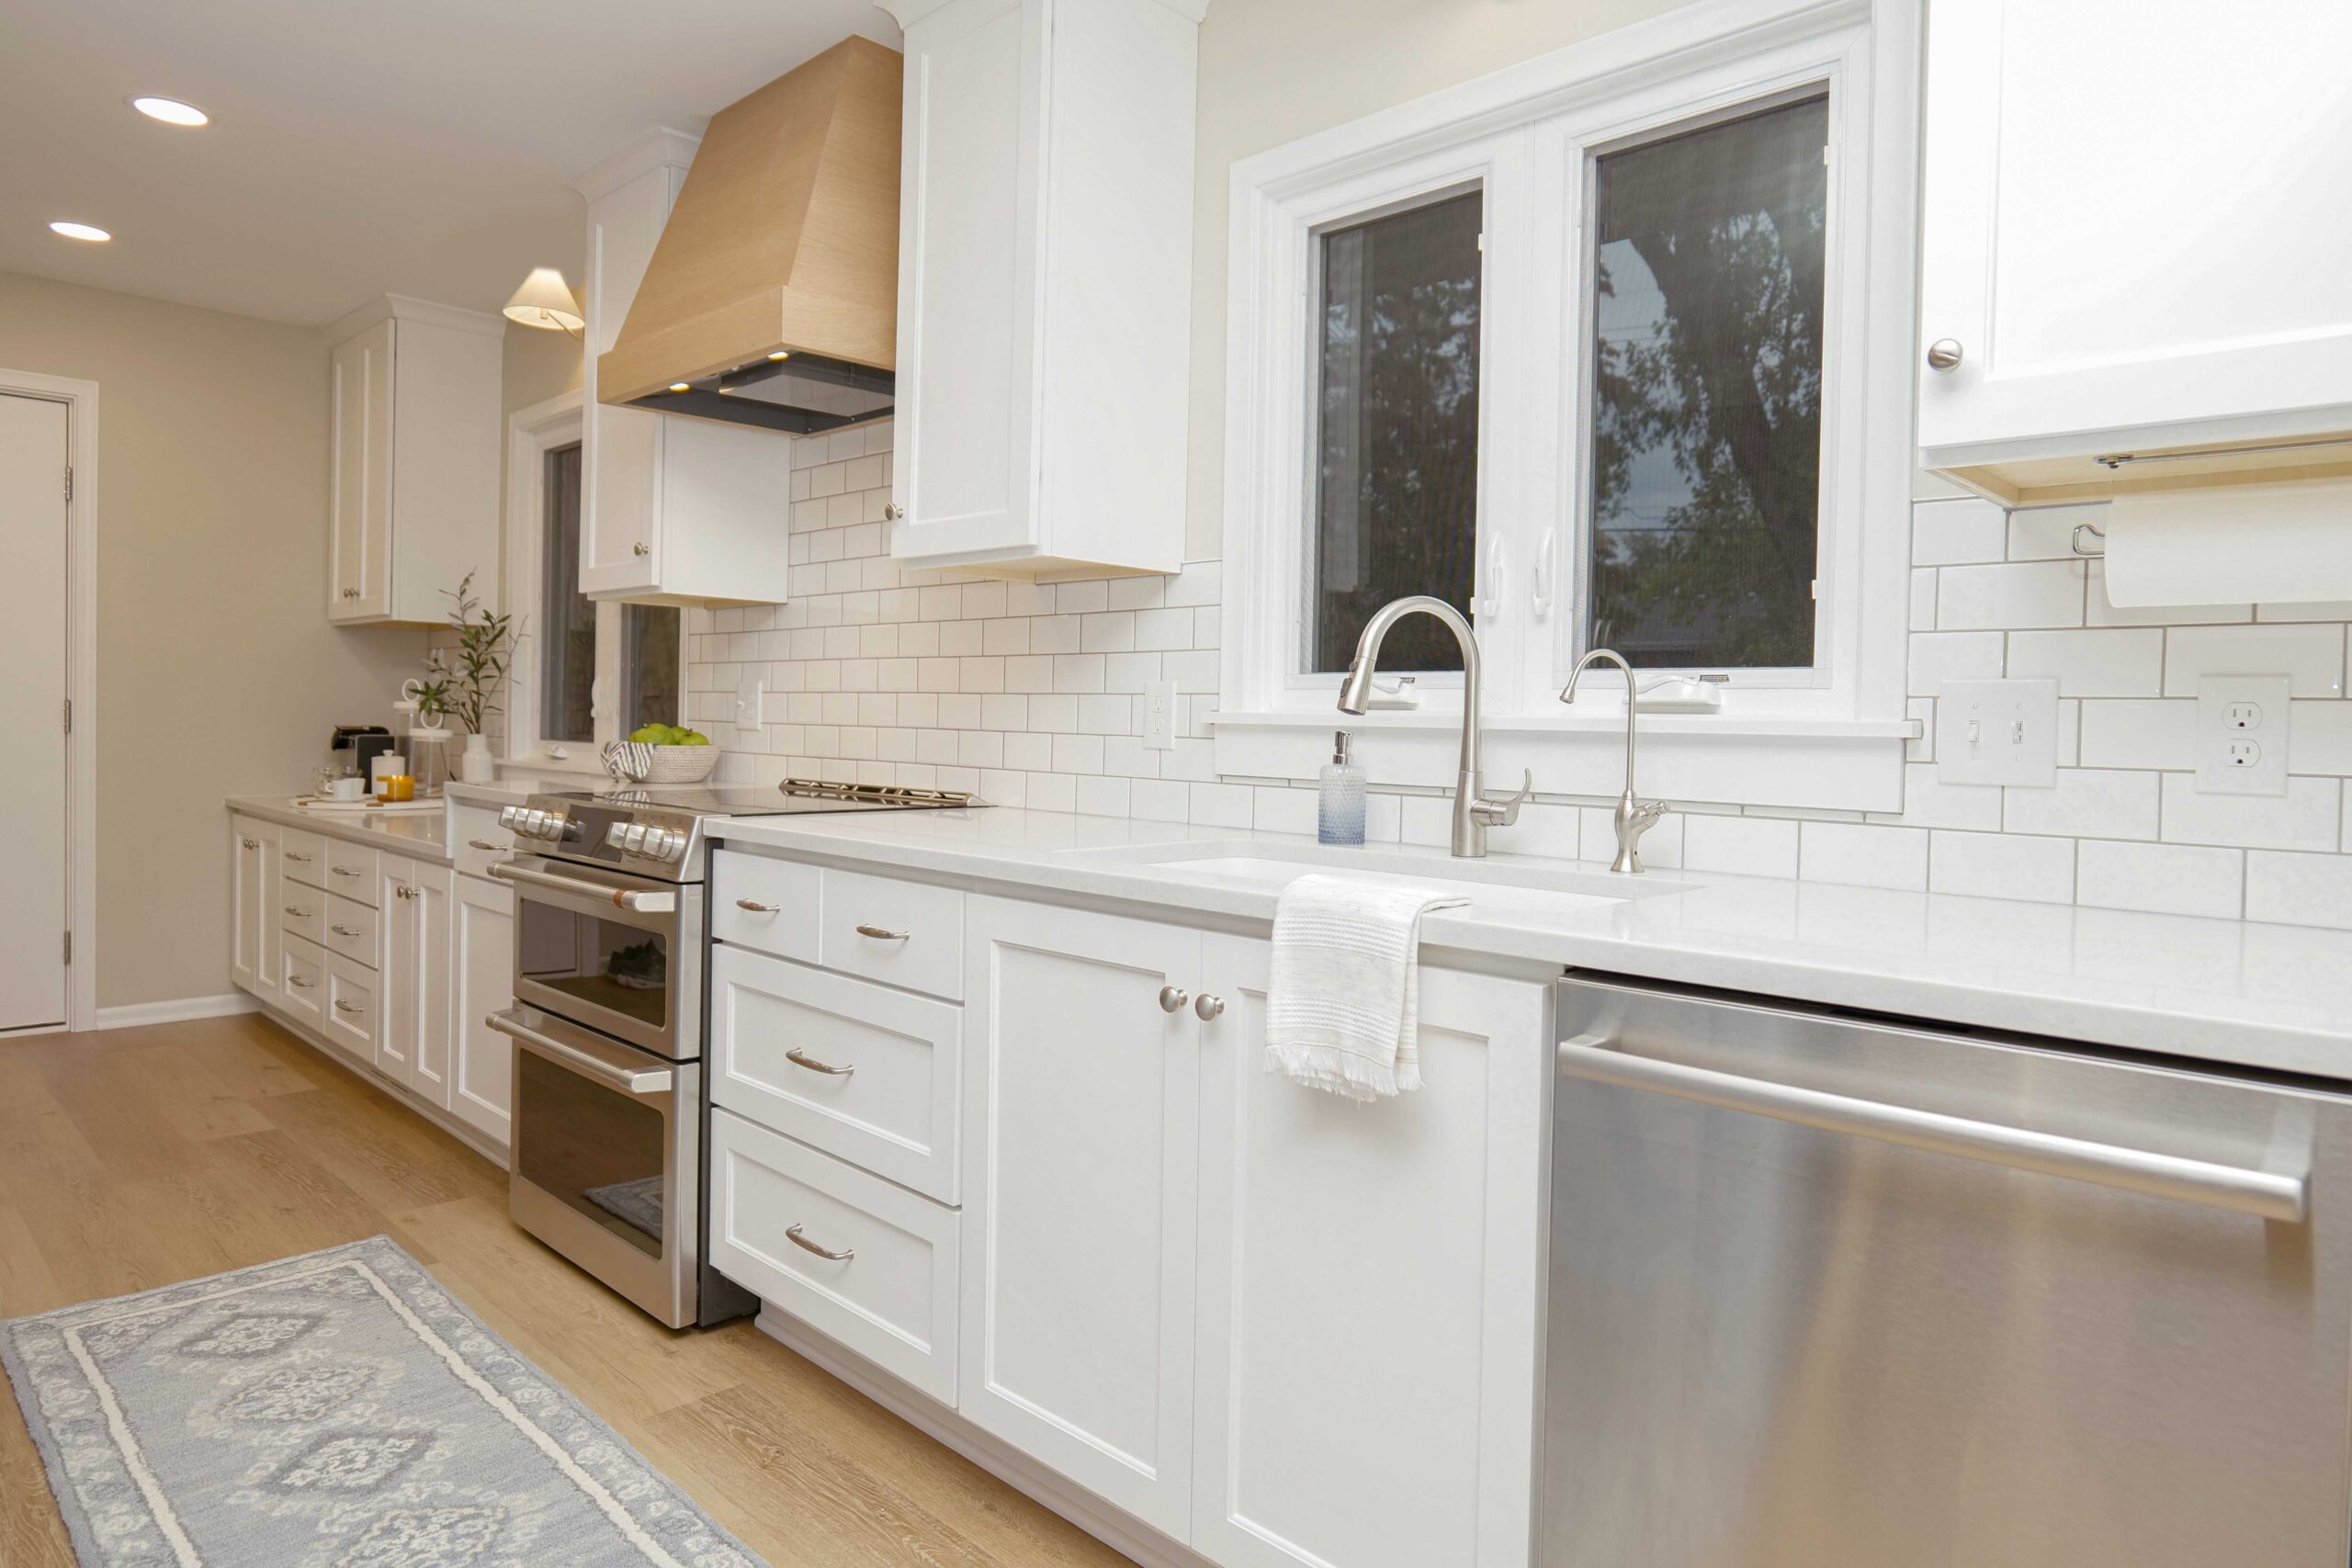 A coastal style kitchen remodel with white cabinets and a wooden floor.